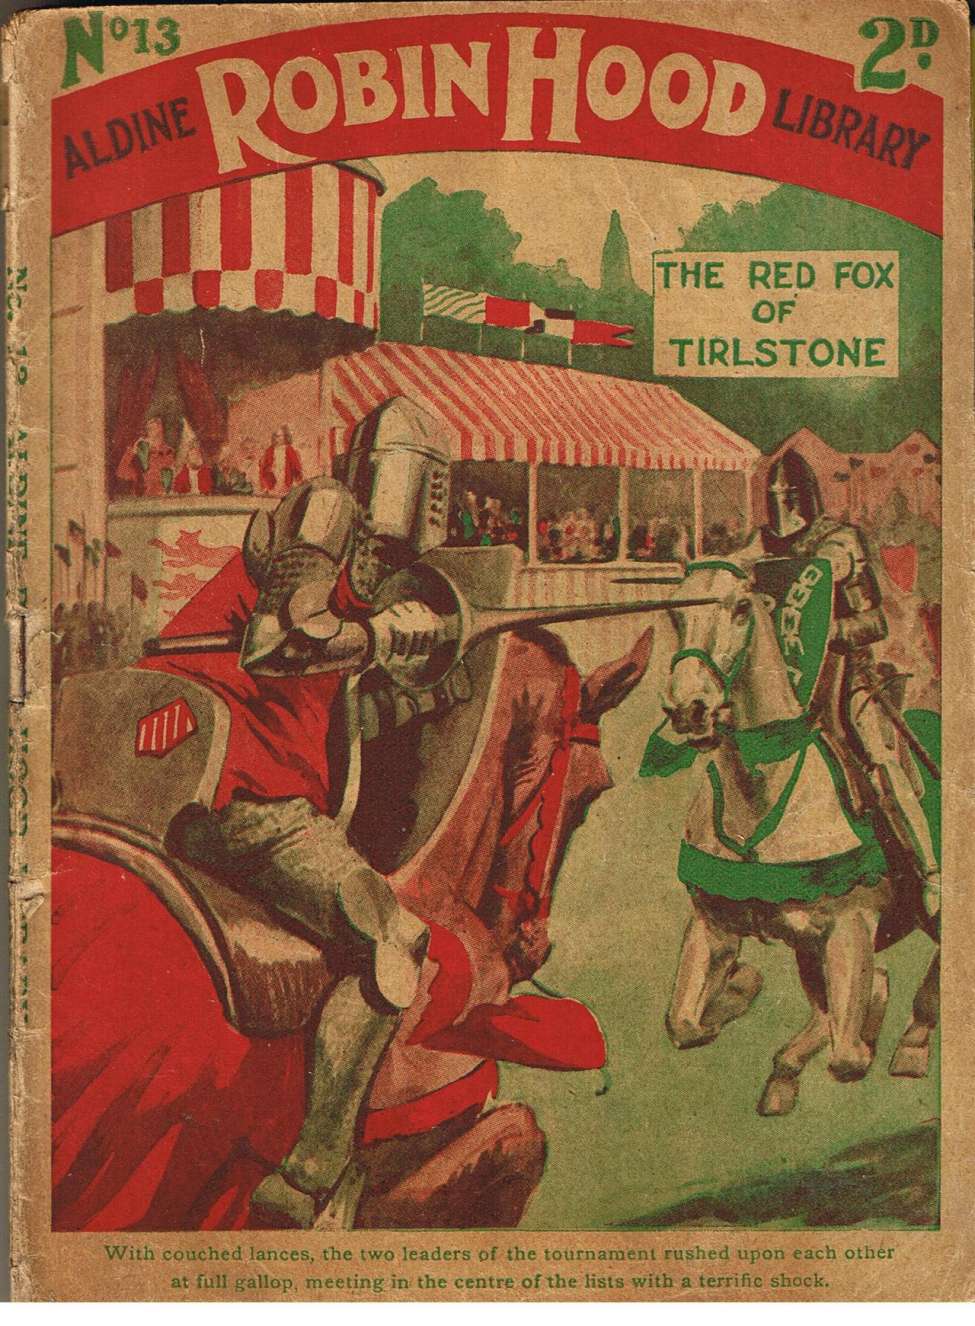 Comic Book Cover For Aldine Robin Hood Library 13 - The Red Fox of Tirlstone